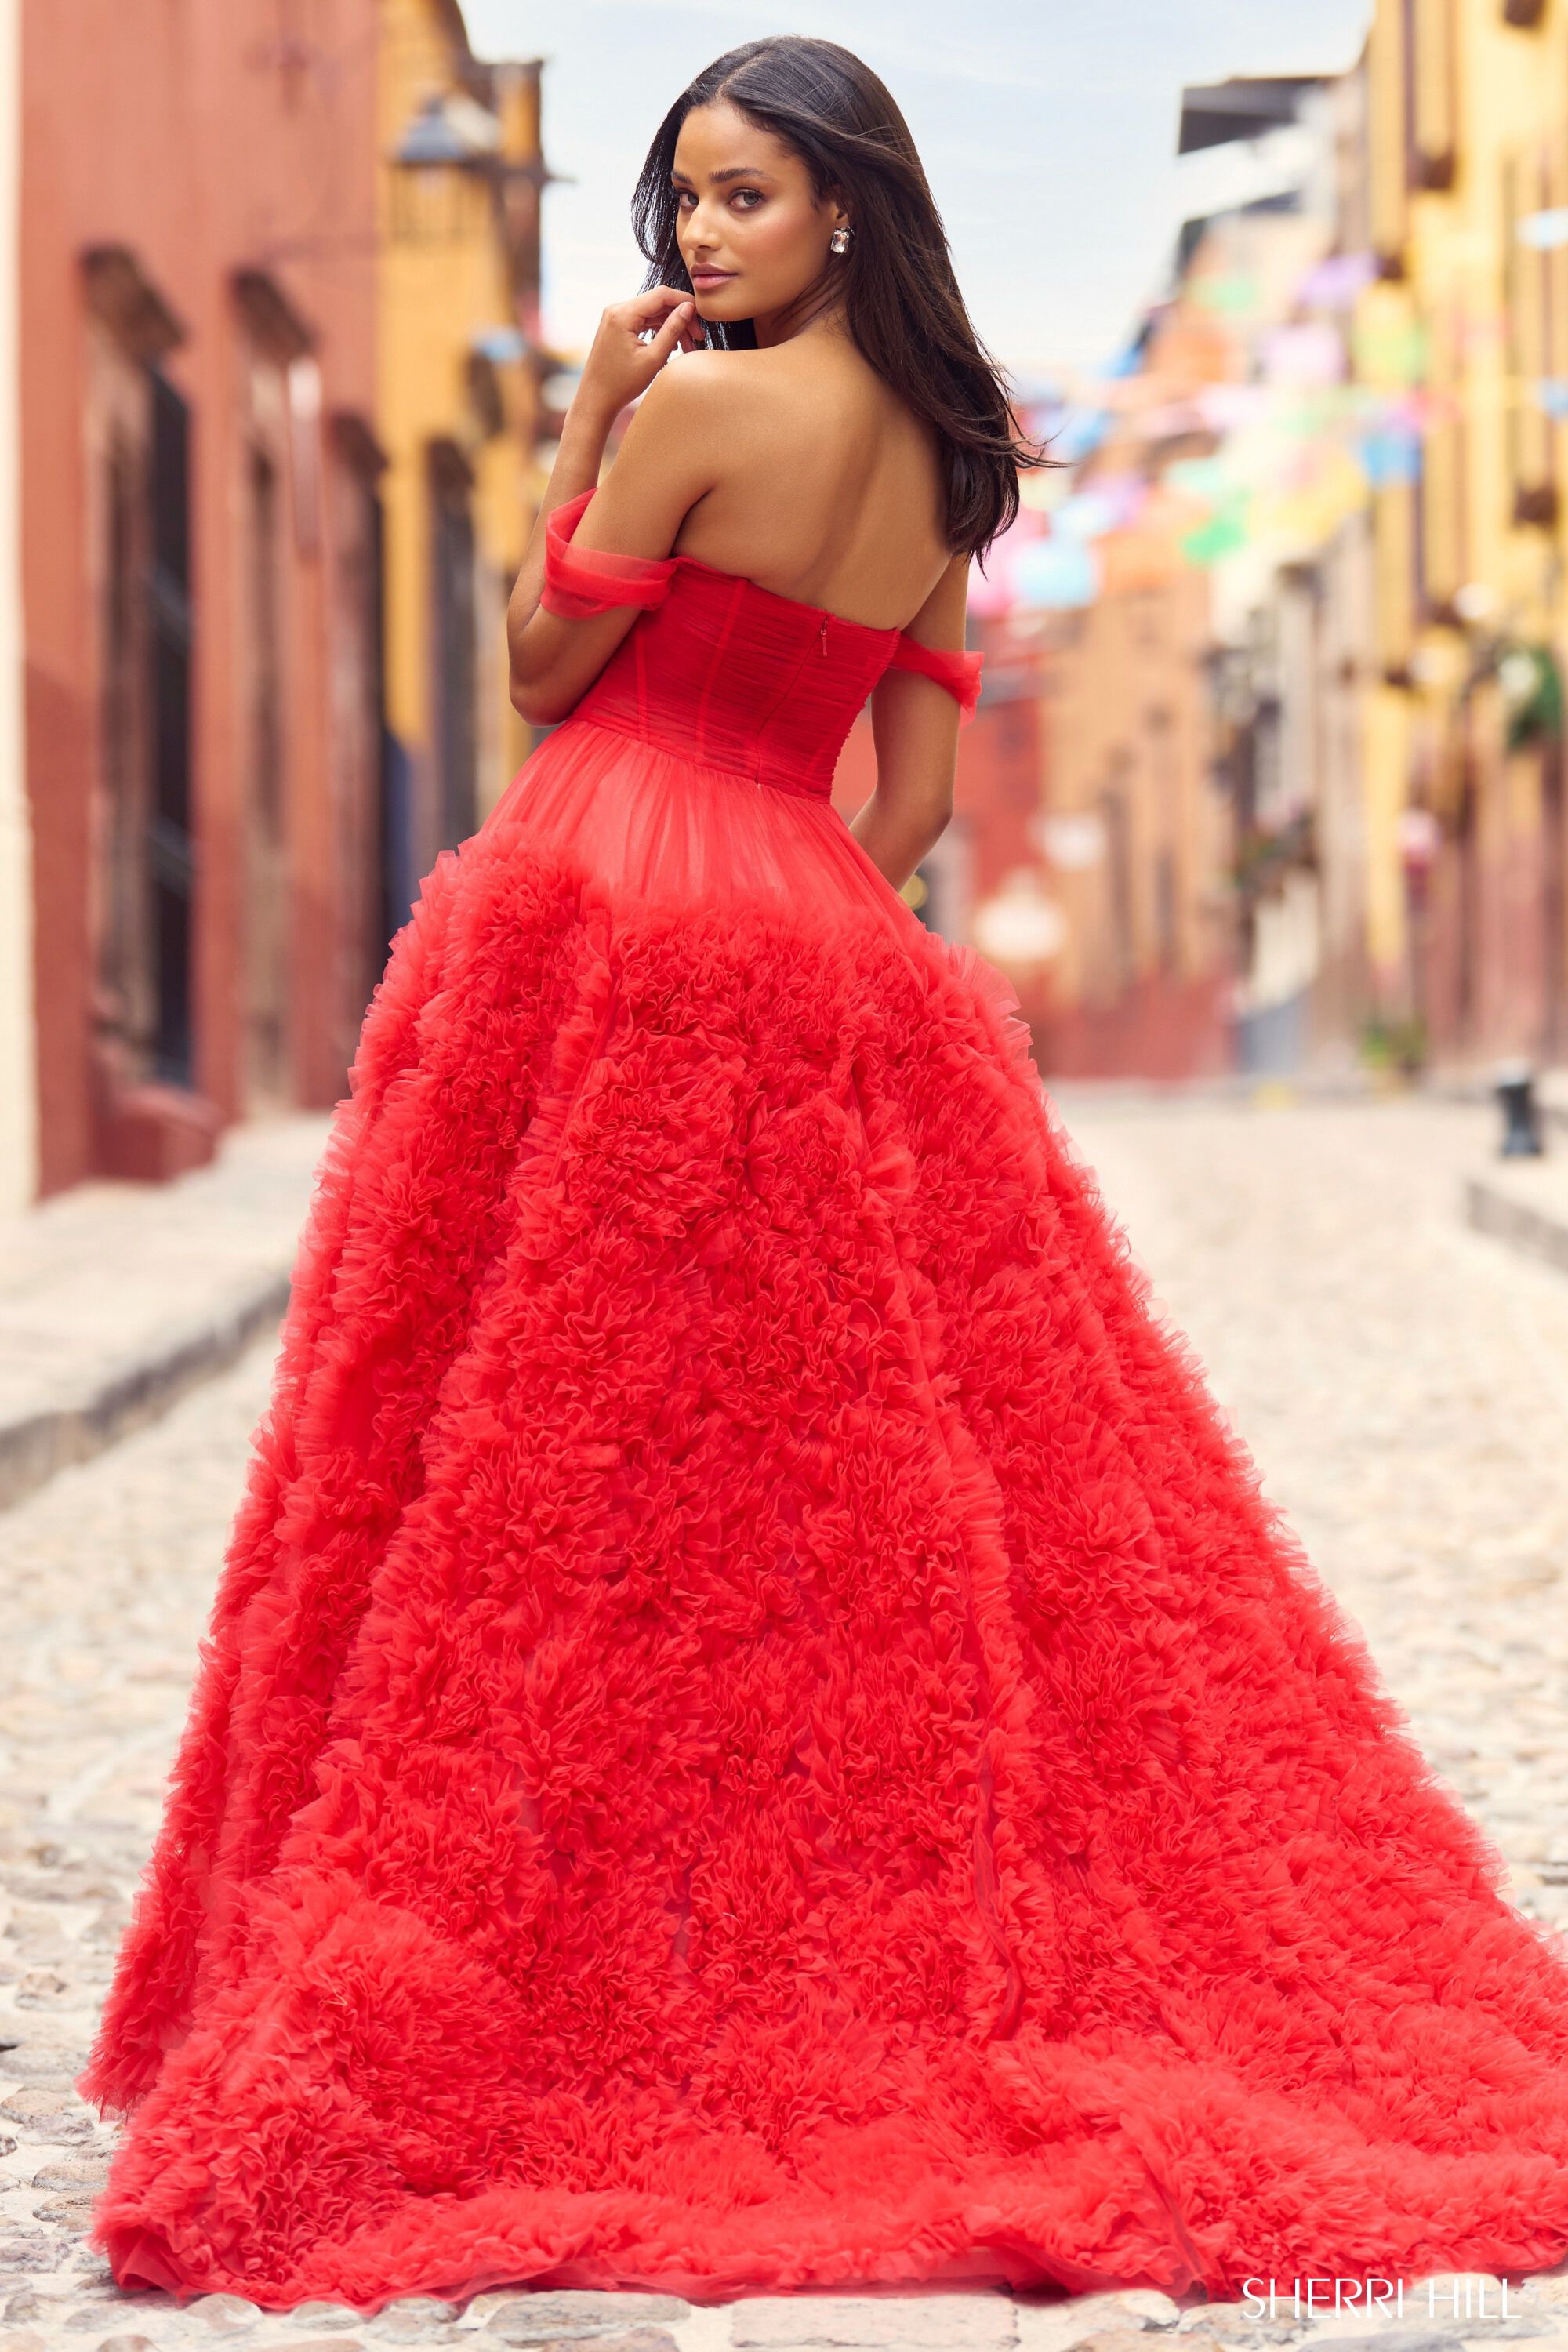 Woman Red Dress Fashion Model In Long Gown Turning Stock Photo - Download  Image Now - iStock